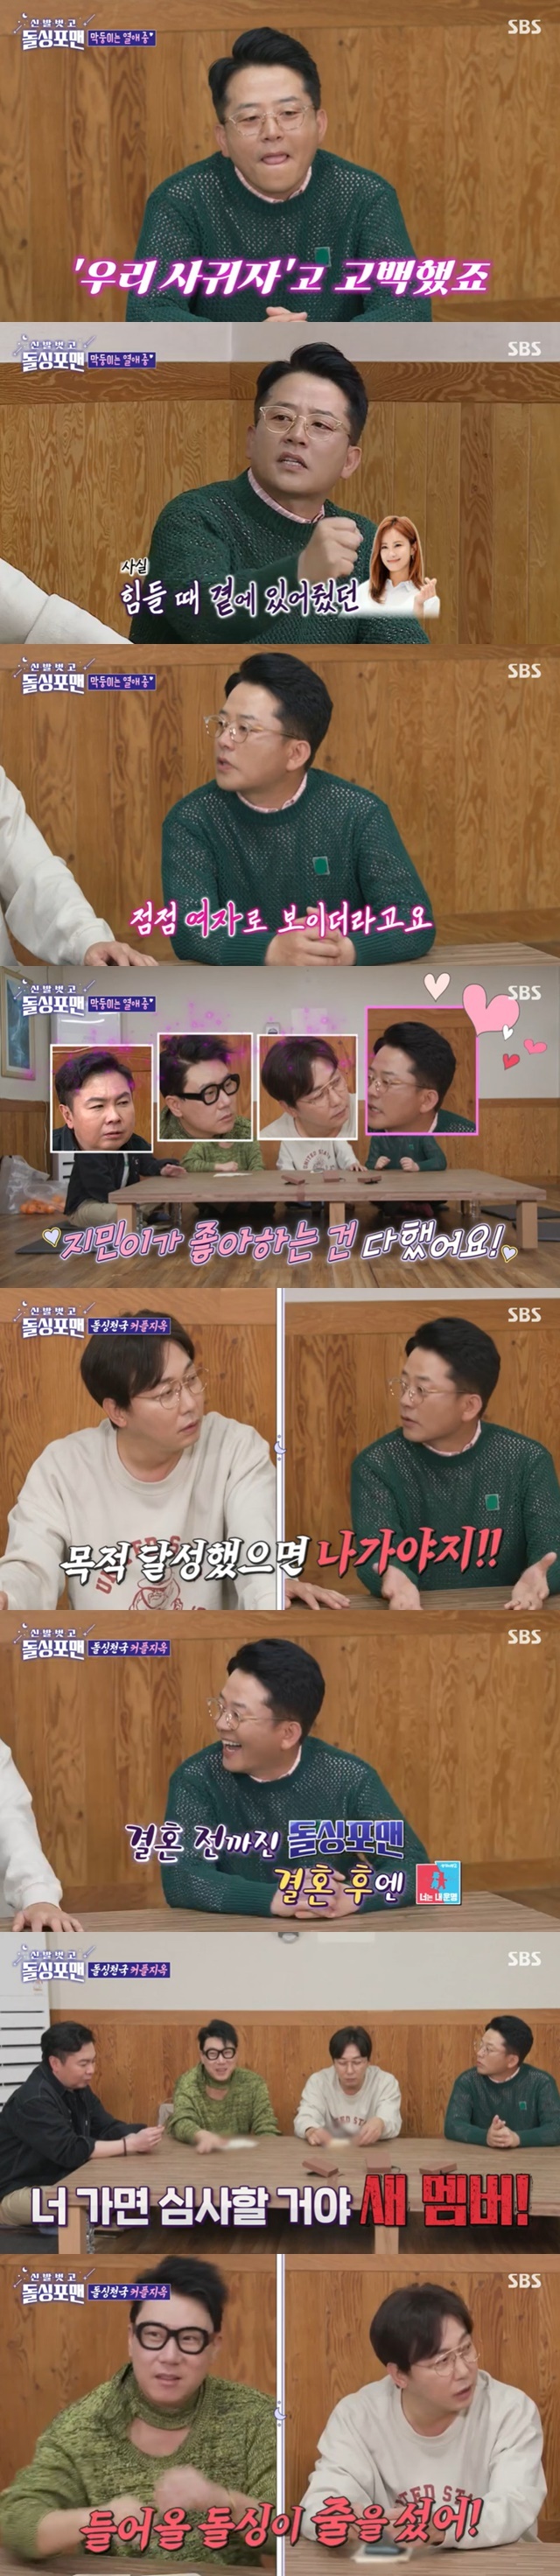 Kim Jun-ho nailed Kim Ji-min and her love affair, saying, There is no getting off the Dolsing Forman after the Confessions.On April 19, SBS Take off your shoes and dolsing foreman, the youngest Kim Jun-hos devotional confessions were angry.On the same day, Tak Jae-hun and Lee Sang-min responded to Kim Jun-ho and Kim Ji-mins enthusiasm with the lyrics of Jang Jang-has song How much Im Going.Tak Jae-hun and Lee Sang-min continued to envy the song lyrics How much will I go?Kim Jun-ho compared Kim Ji-min to a doll and stimulated the jealousy of his brothers by saying I like to hold a doll and I kiss every day.Kim Jun-ho said, I talked like a man, but I did not talk to him.Lets go out, he said, and when Tak Jae-hun asked, Did that fall out of your mouth? I drank a lot of alcohol, and my family stayed in my office every time I was in trouble.Shes been looking more and more like a woman since then. Ive done everything she likes. Dont do what she hates.Kim Jun-ho said Kim Ji-min showed a change in his clothes and camping before he started dating the beginning of the year, saying, I do not like that.Something must change. Not in this state. He stressed that love also needs to be done.Kim Jun-ho also said, Im under skin care. I cant. Im getting younger. Im brushing my teeth. I hate tongue white.Kim Ji-min was going to the East Sea in the morning, and I gave him a delivery application in time. Lee Sang-min threw a paper and exploded jealousy.But Kim Jun-ho said he would not care and would also learn piano and cooking to make Kim Ji-min look good.Tak Jae-hun said, Do you want to choose the program or love?You are not in the concept anymore, he said, putting pressure on getting off the Dolsing Forman , but Kim Jun-ho refused, We should also raise money for marriage here. Lee Sang-min said, The design of her is to come out as a dolsing man before she gets married, and then same dream after she gets married. Live well, if you break up, youll make fun of her for a month.Hes coming in here, he congratulated.Heo Kyoung-hwan, who appeared following, revealed that the comedian group room was stopped in the news of Kim Jun-ho and Kim Ji-mins devotion, and made the comedian guess the shock.Heo Kyoung-hwan prayed for Kim Jun-ho and Kim Ji-min to get married, and Kim Dong-hyun blessed that the comedian couple had never had a bad ending.Tak Jae-hun and Lee Sang-min joked, I want to break it once. I want to be No. 1.